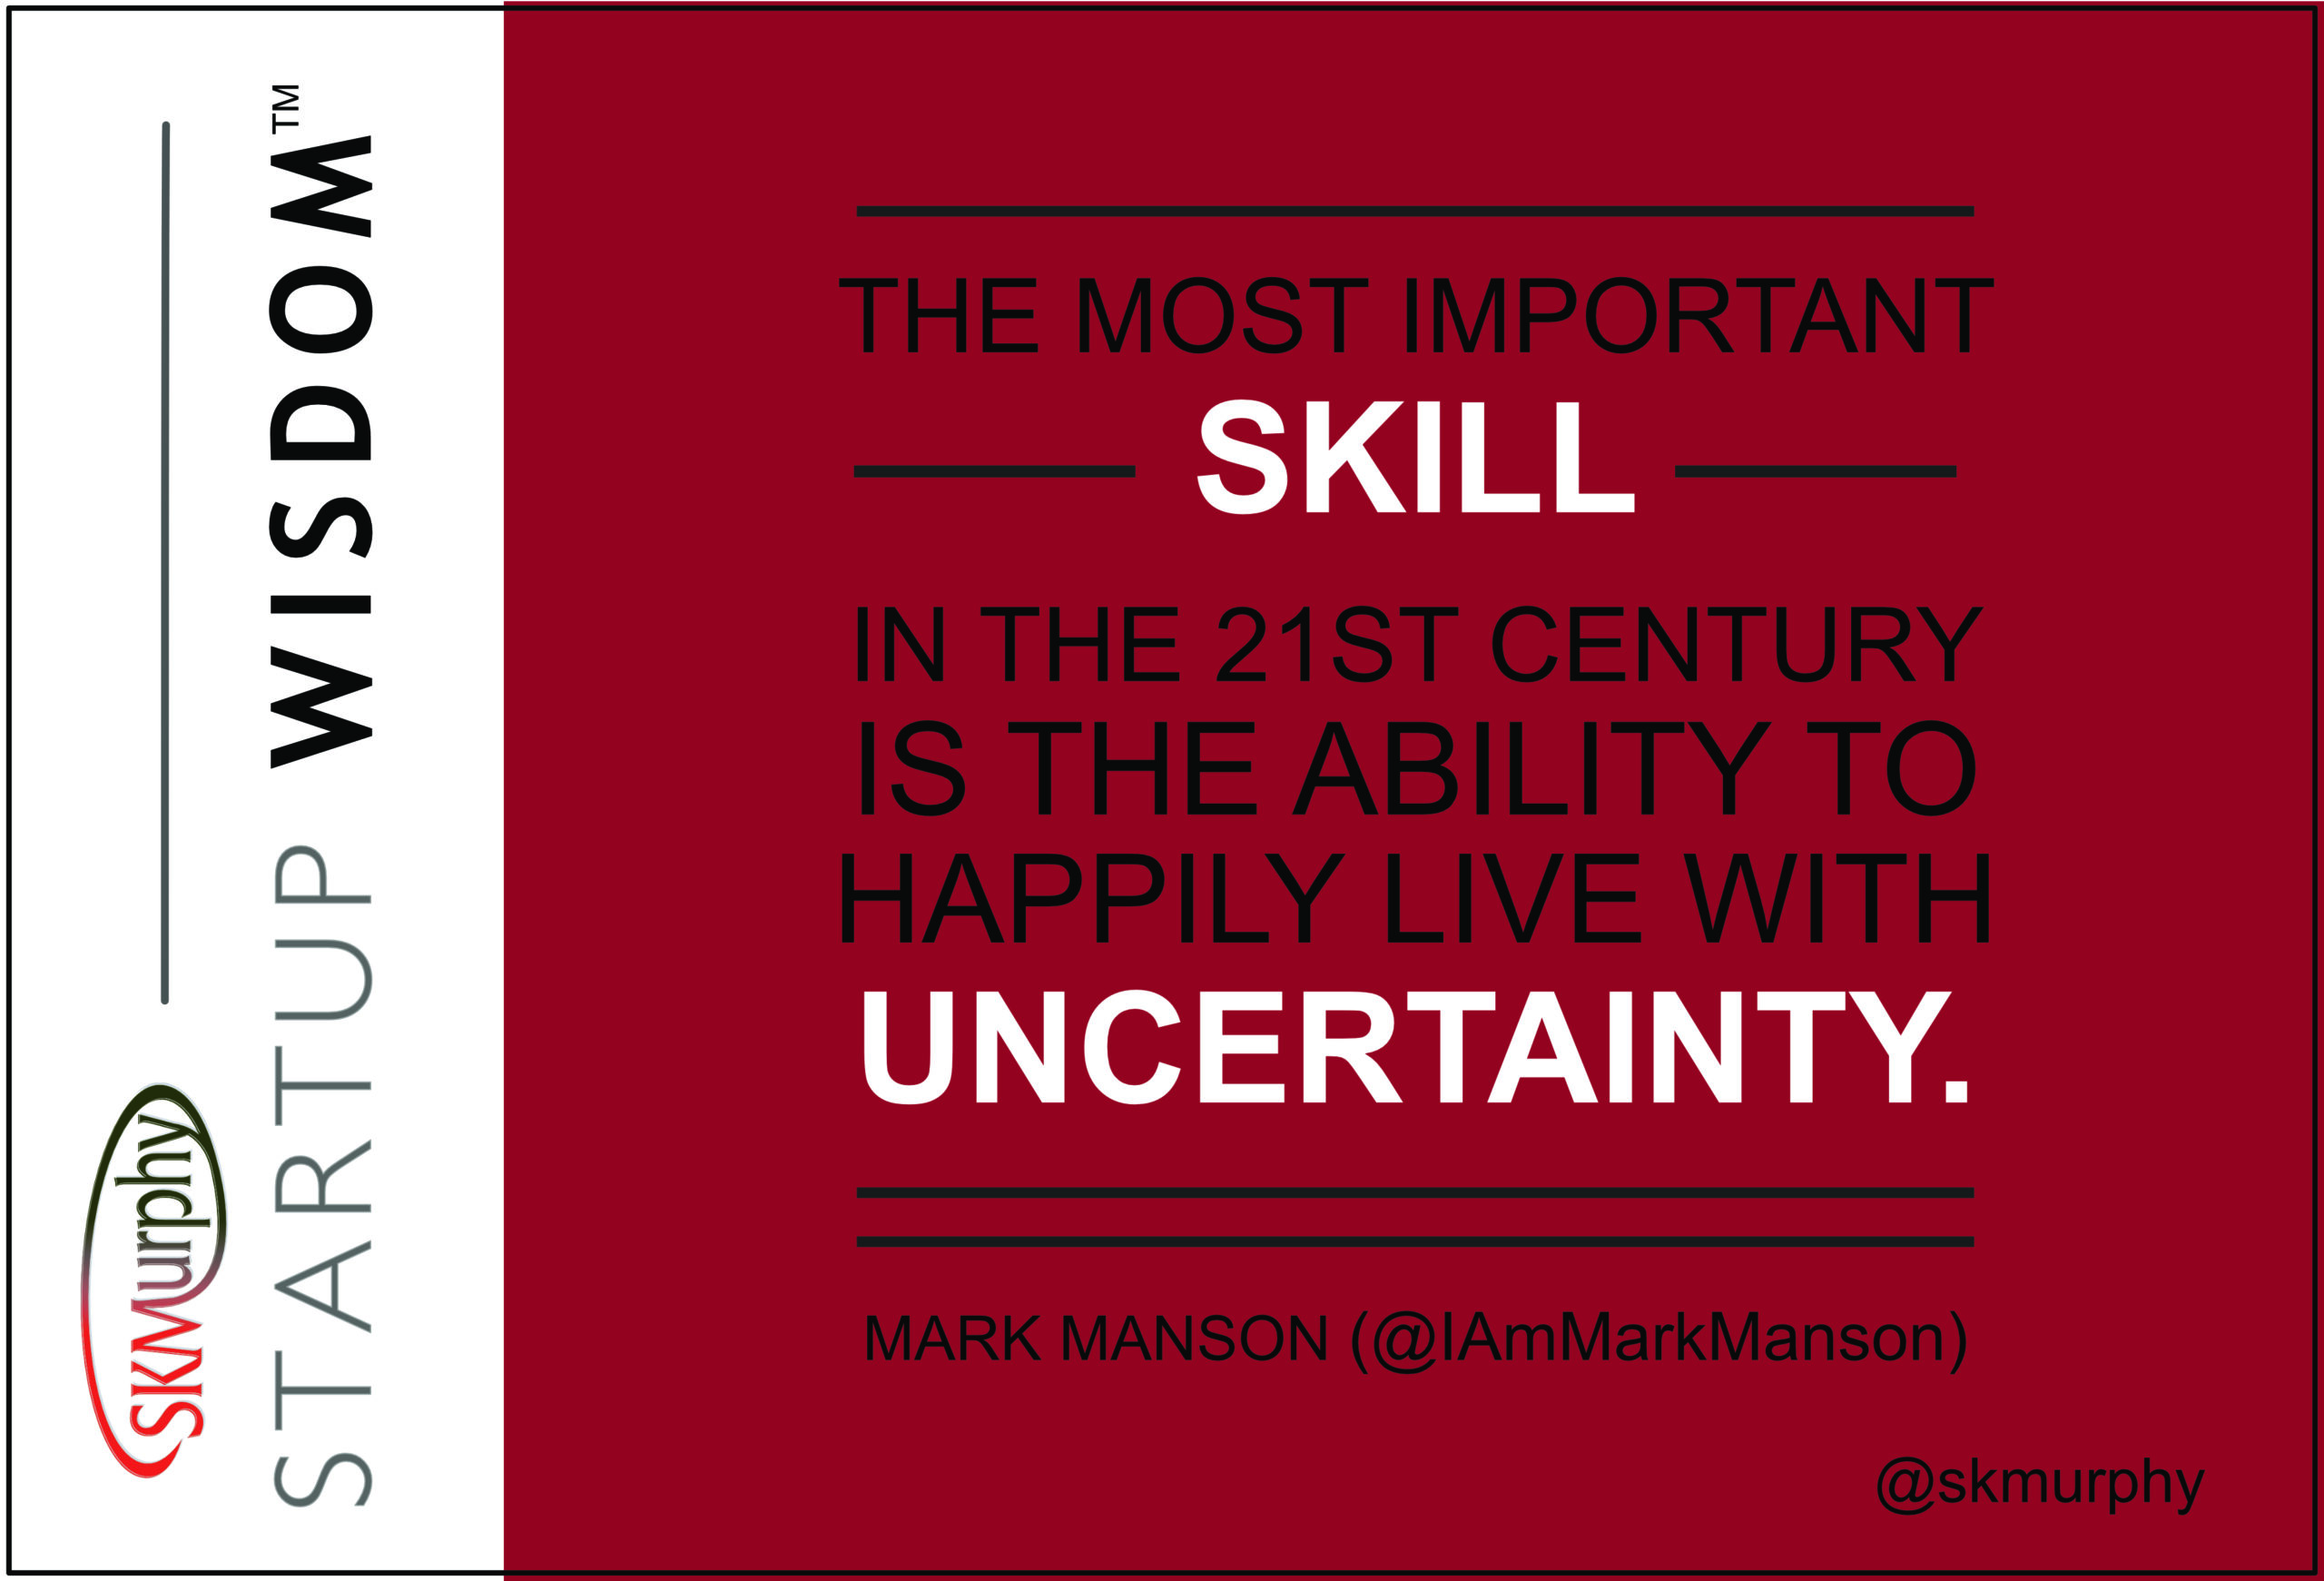 Quotes for Entrepreneurs: "The most important skill in the 21st century is the ability to happily live with uncertainty." Mark Manson (@IAmMarkManson)